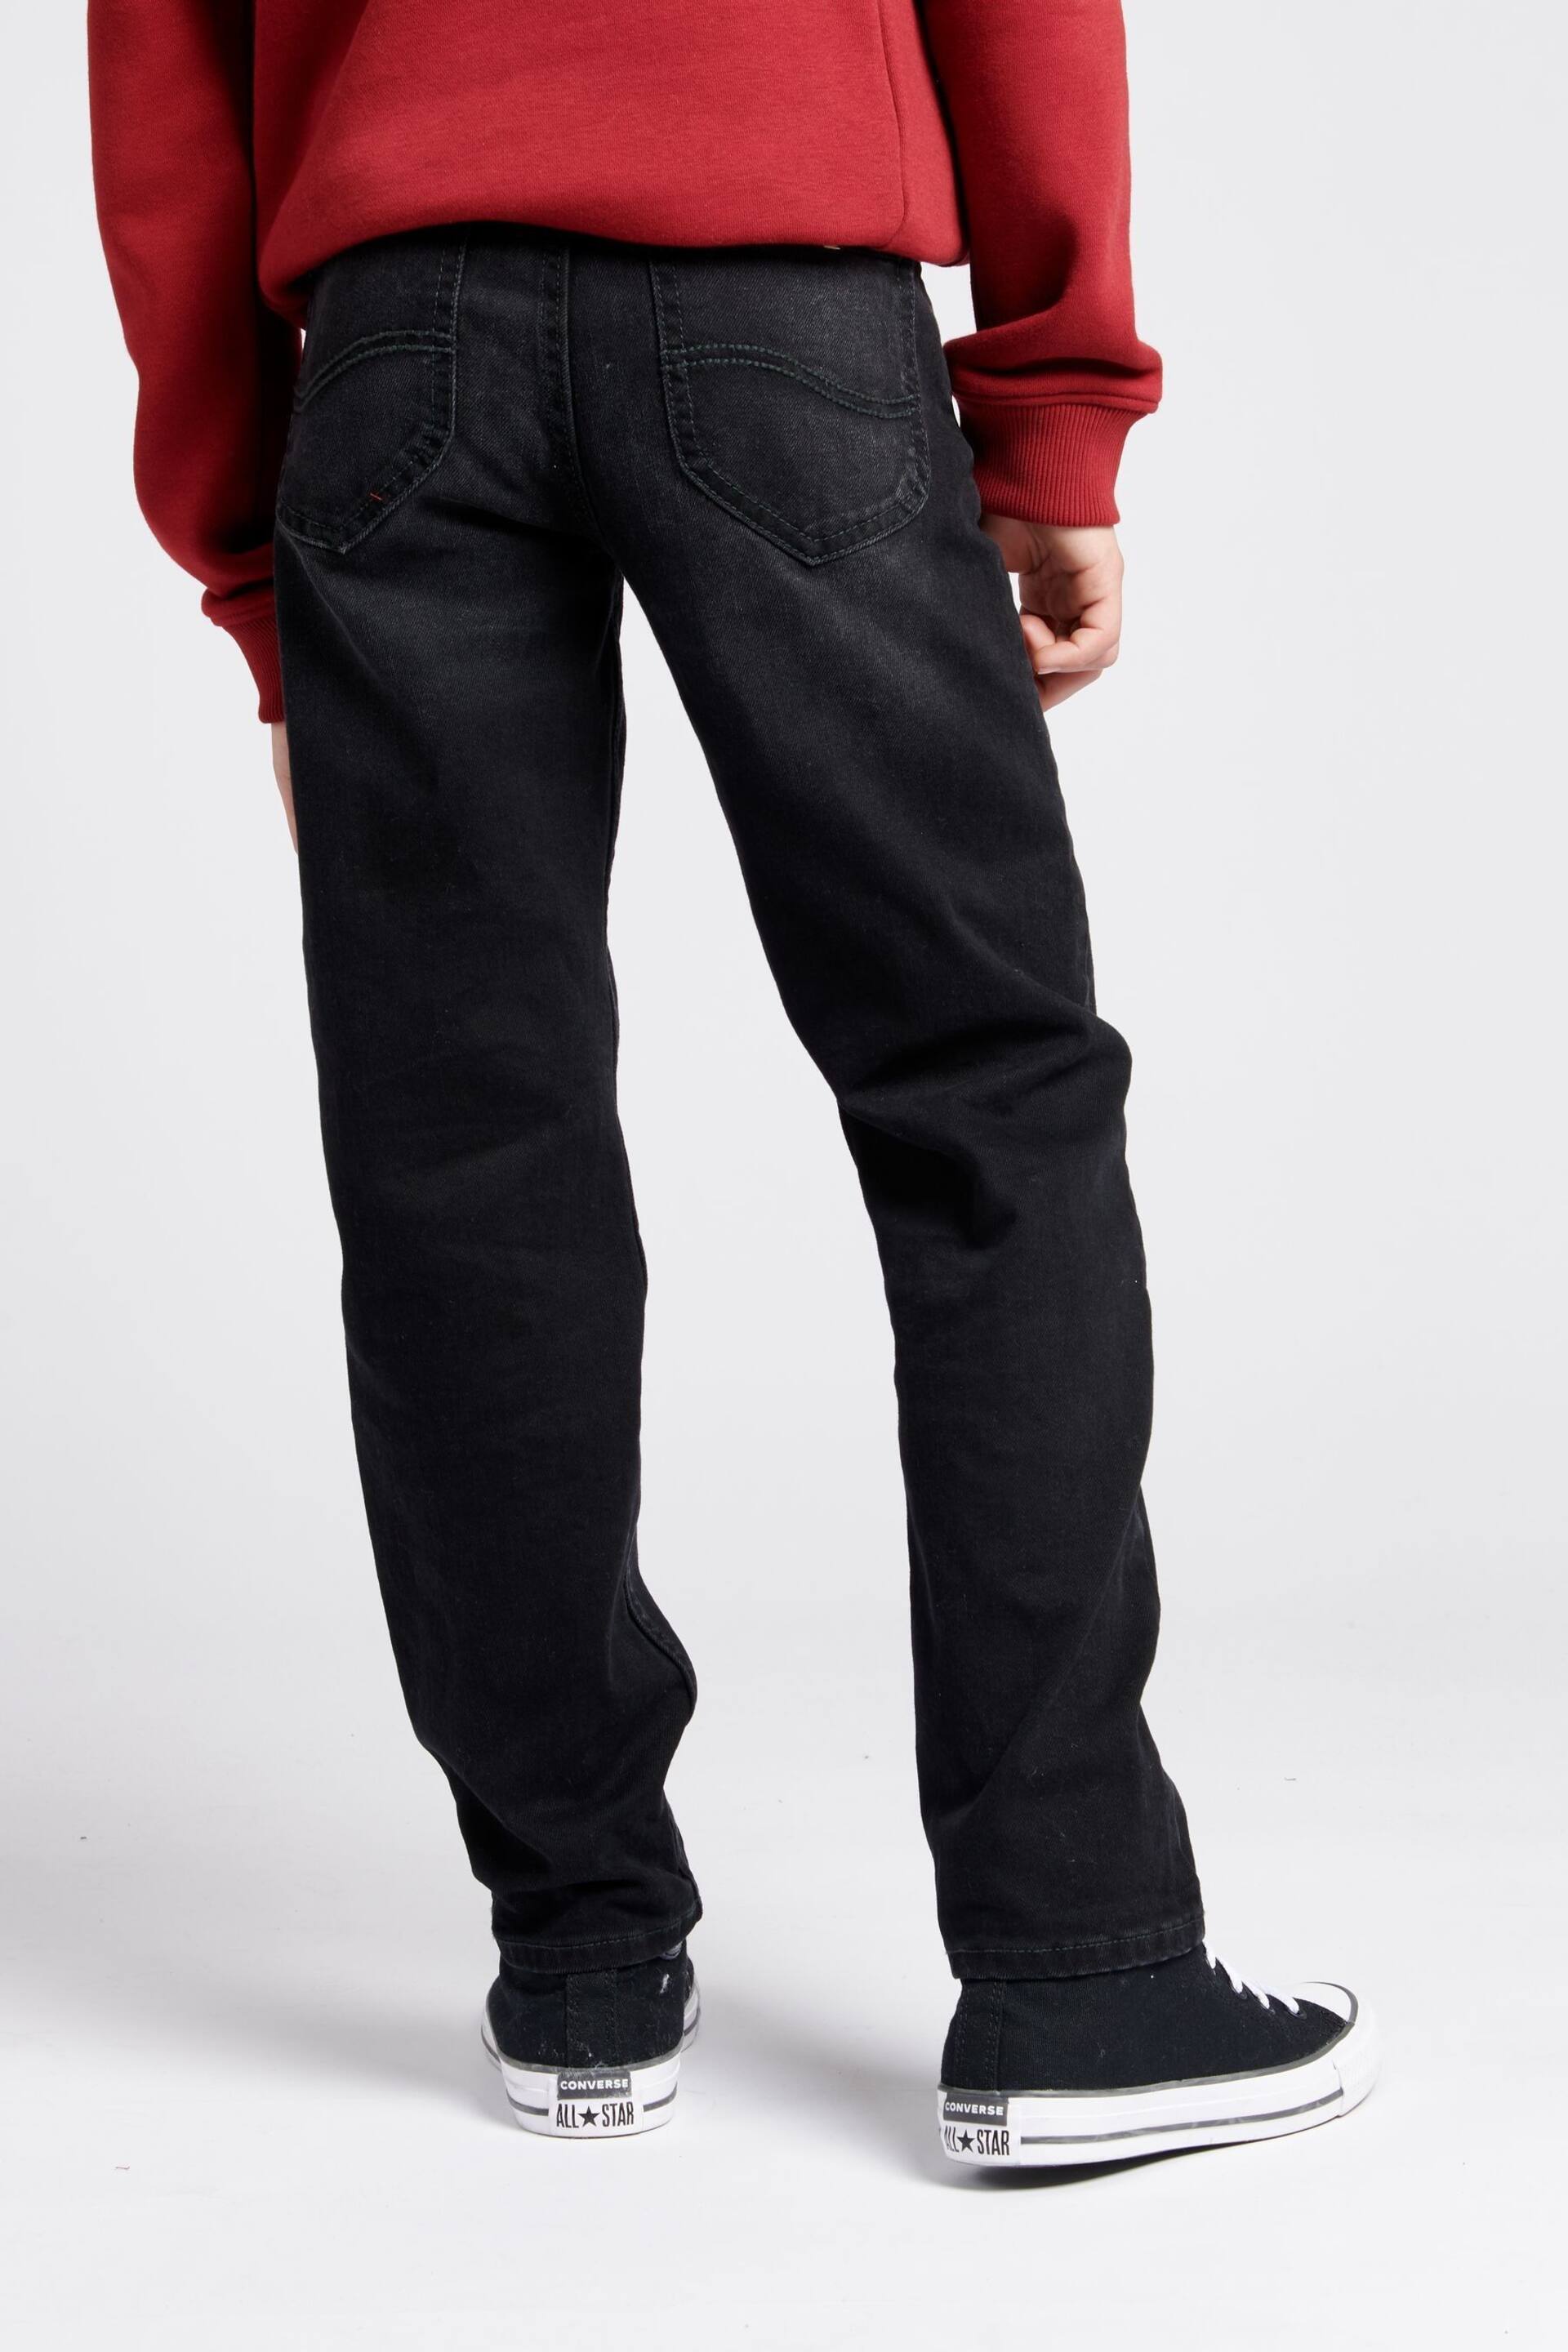 Lee Boys Relaxed Fit West Jeans - Image 2 of 7